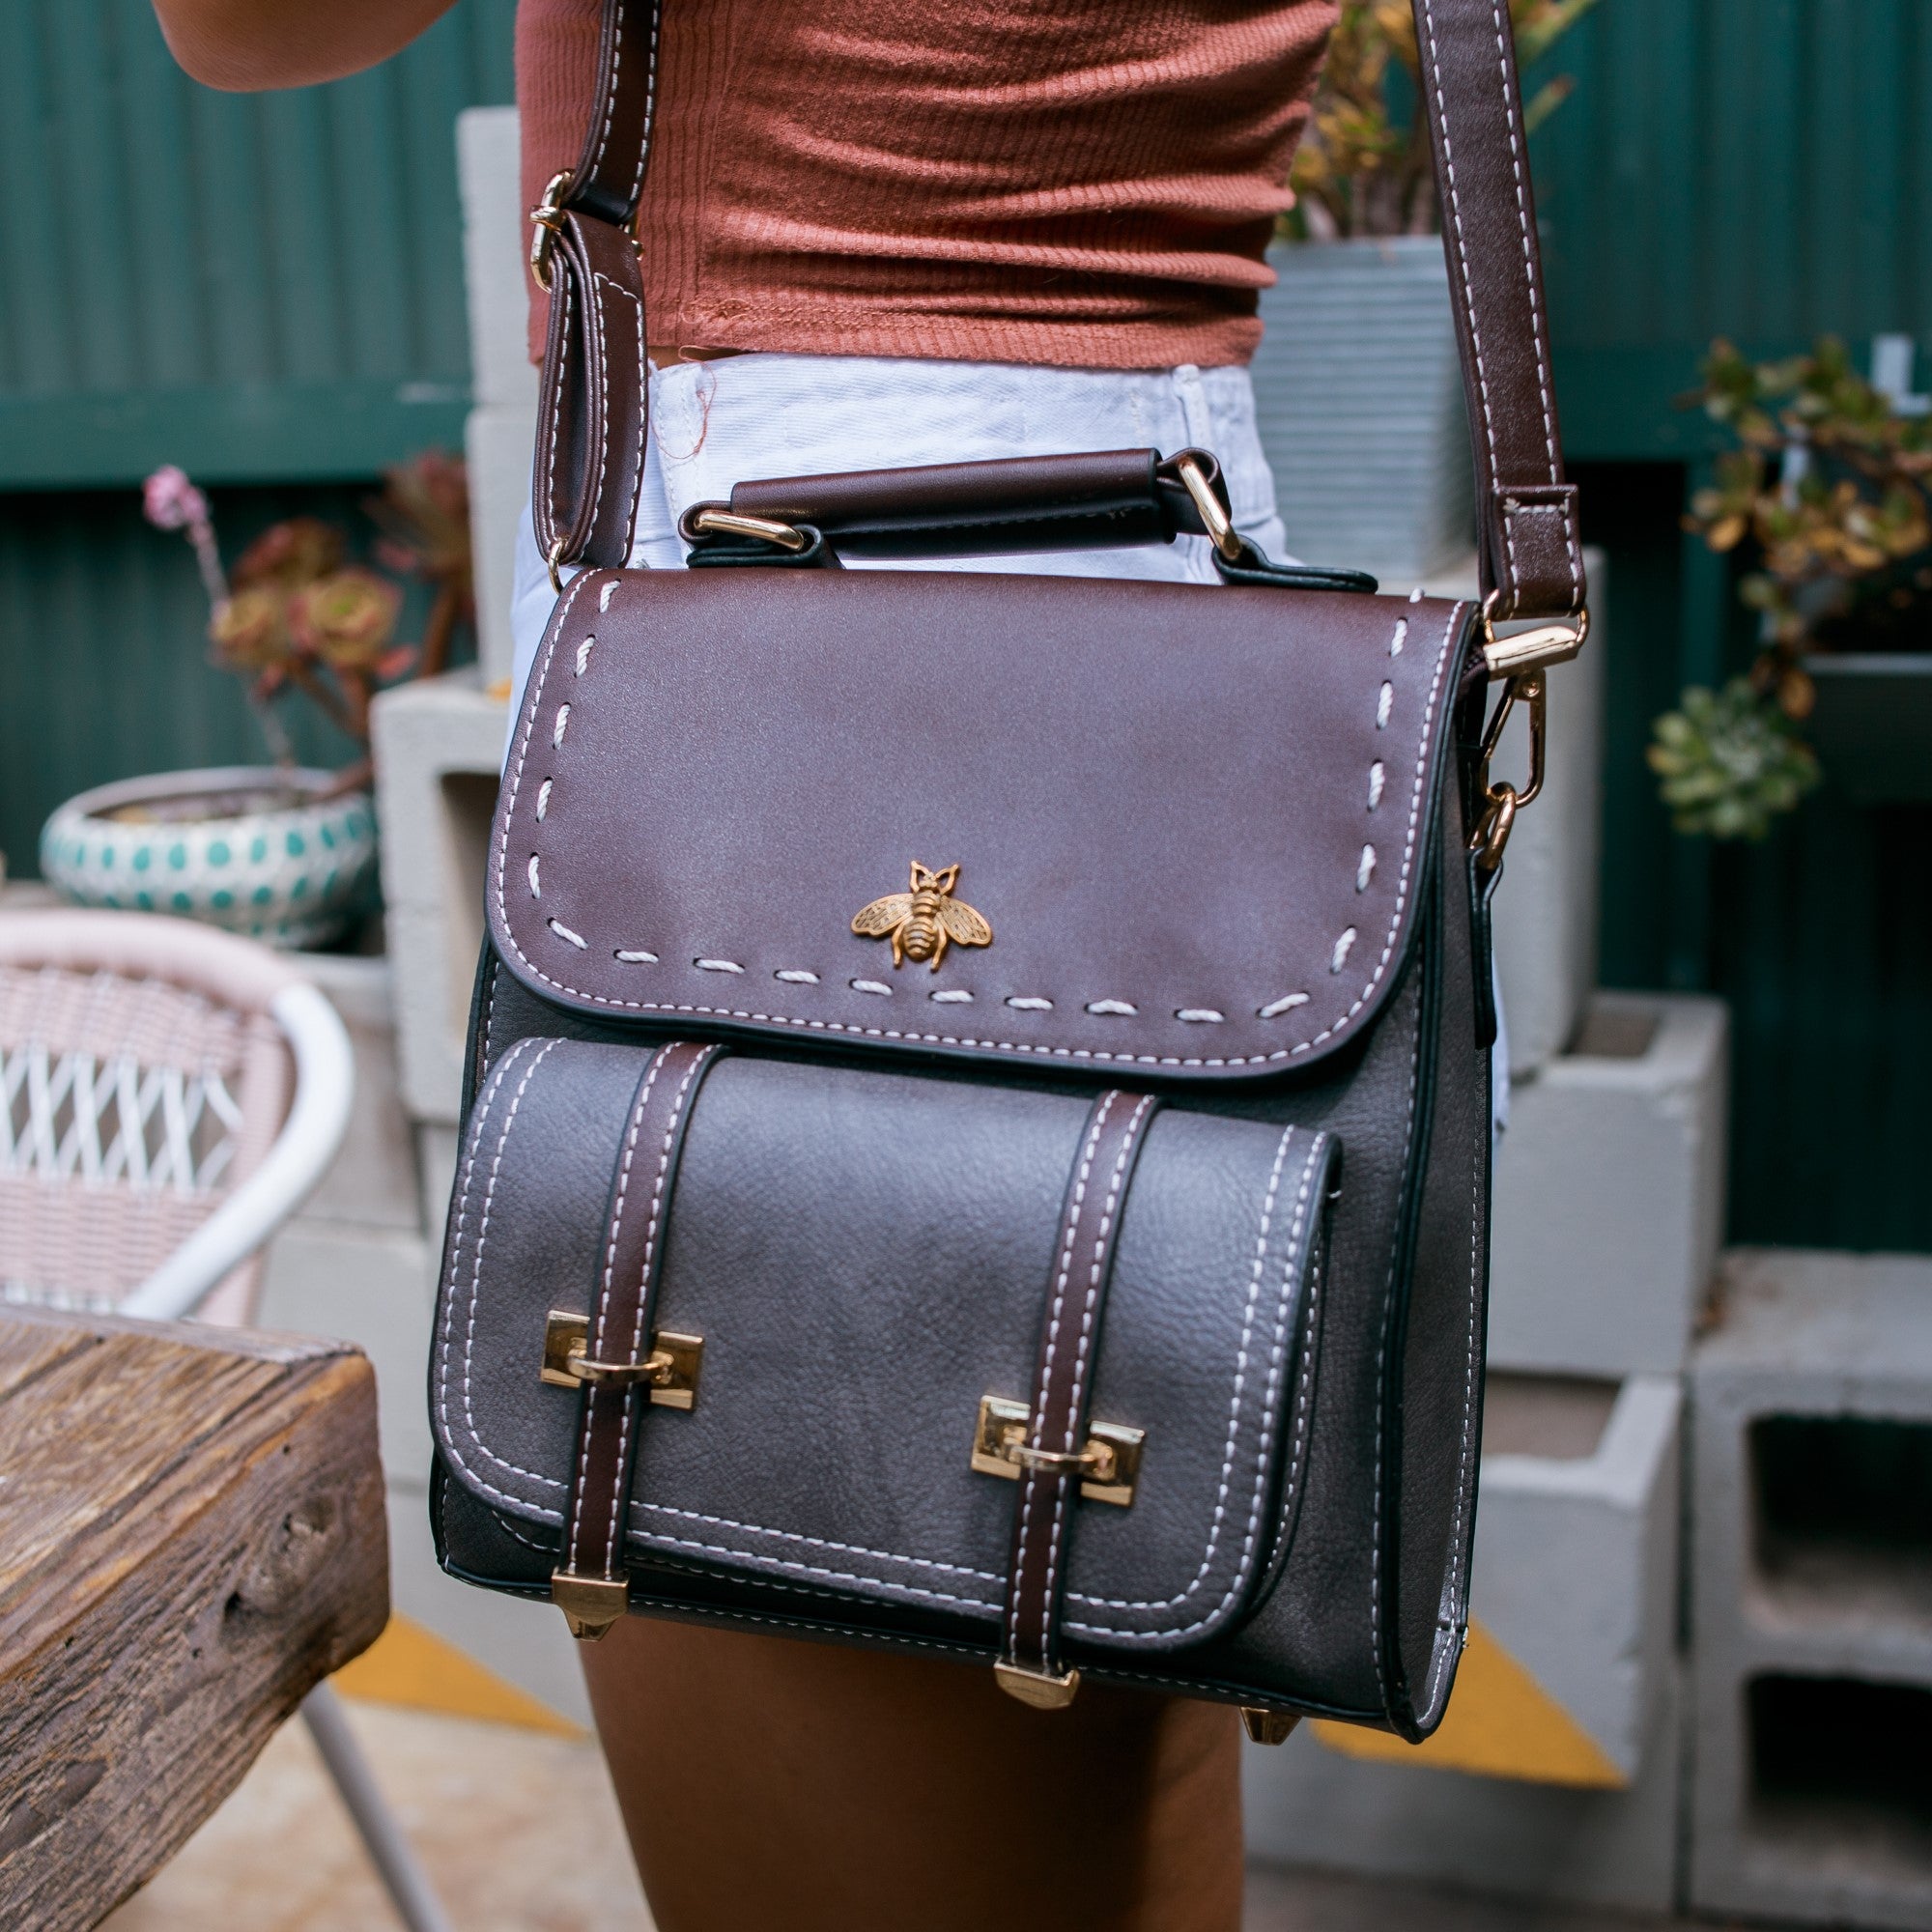 The Beetle  Unisex Leather Backpack – The Real Leather Company